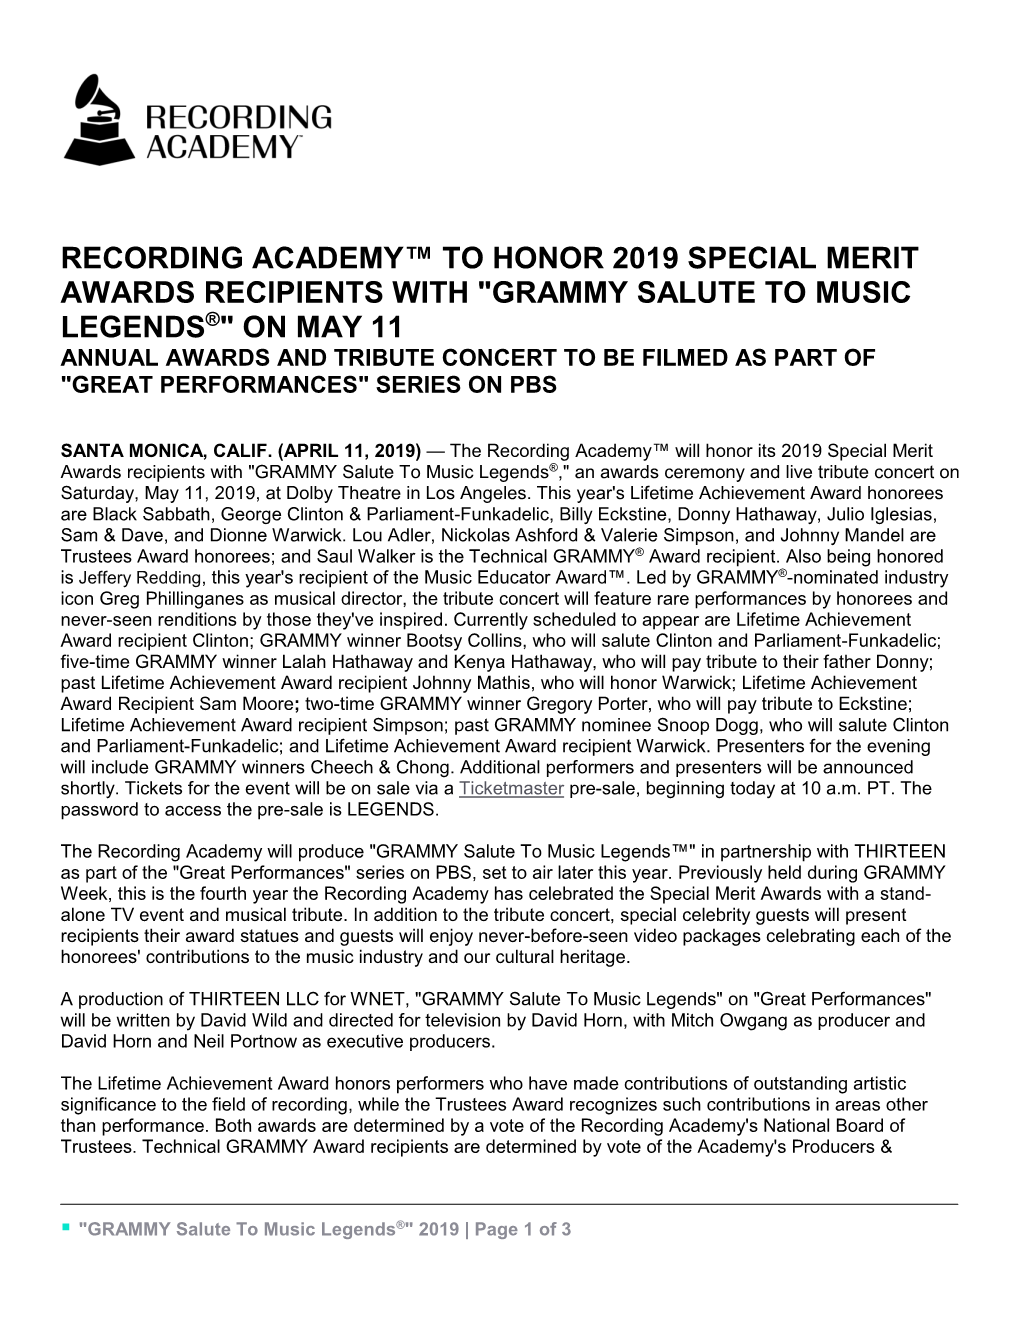 Grammy Salute to Music Legends®" on May 11 Annual Awards and Tribute Concert to Be Filmed As Part of "Great Performances" Series on Pbs